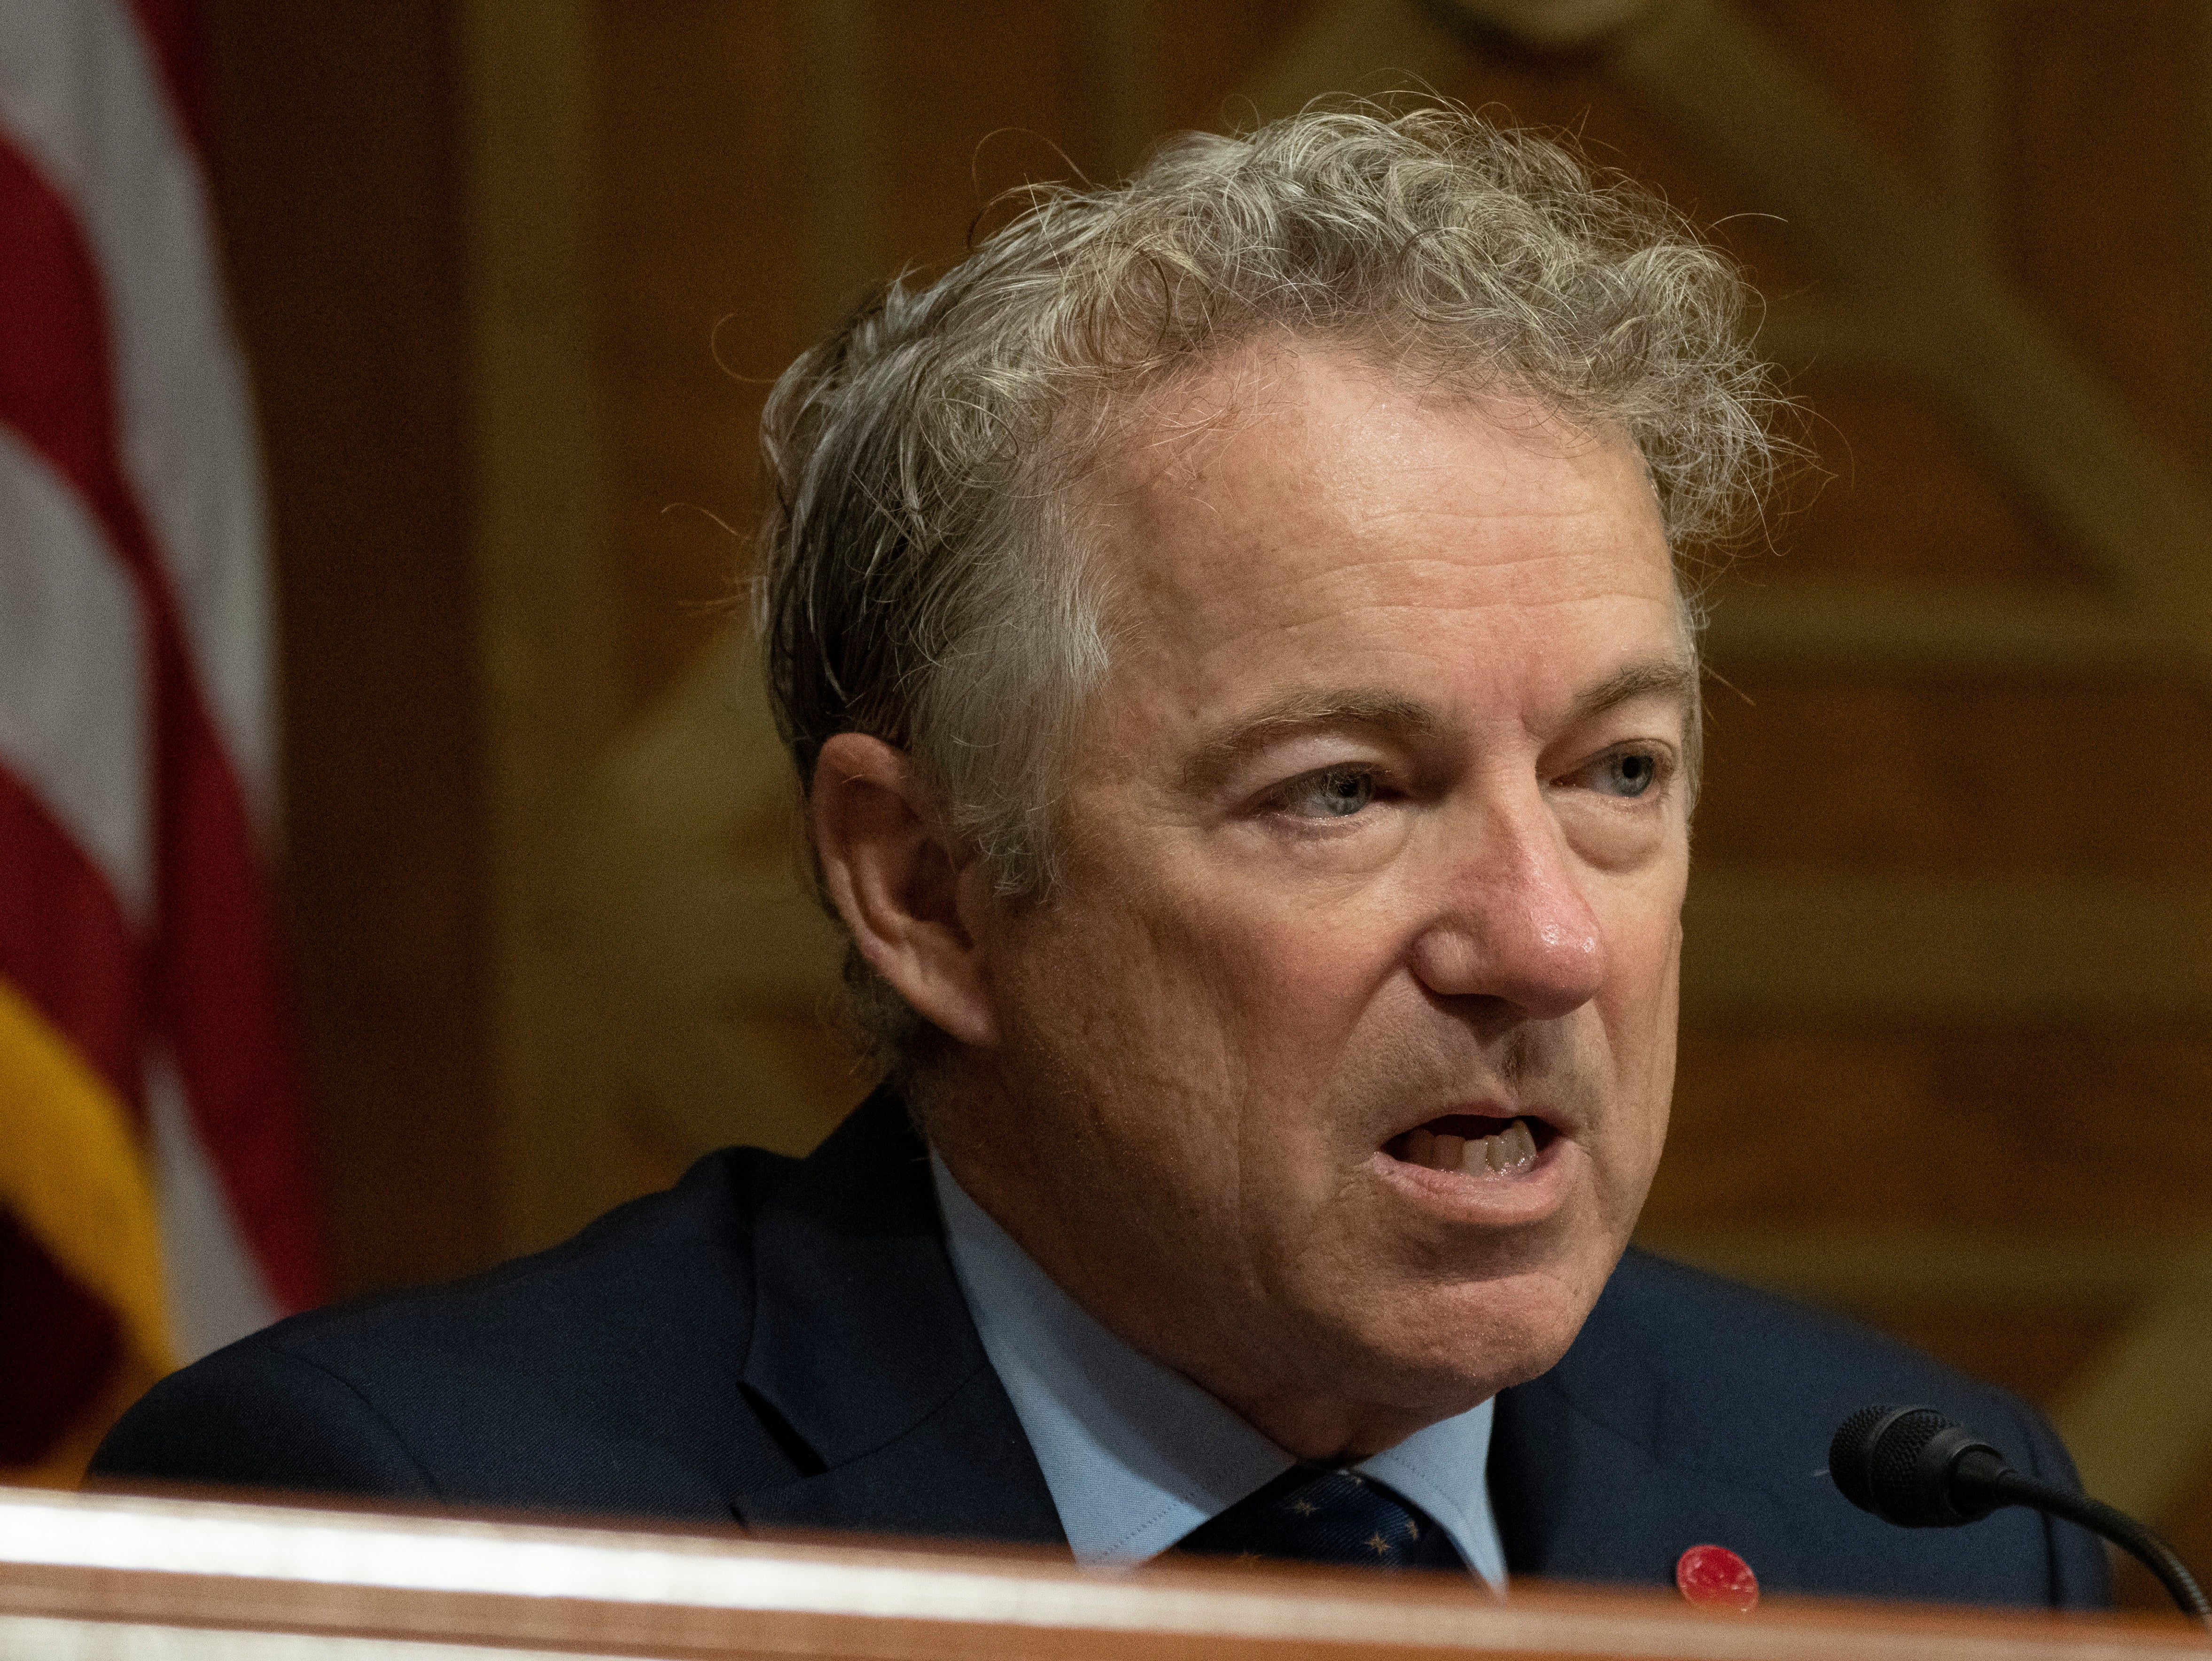 Rand Paul has called into question Mitch McConnell’s dehydration diagnosis